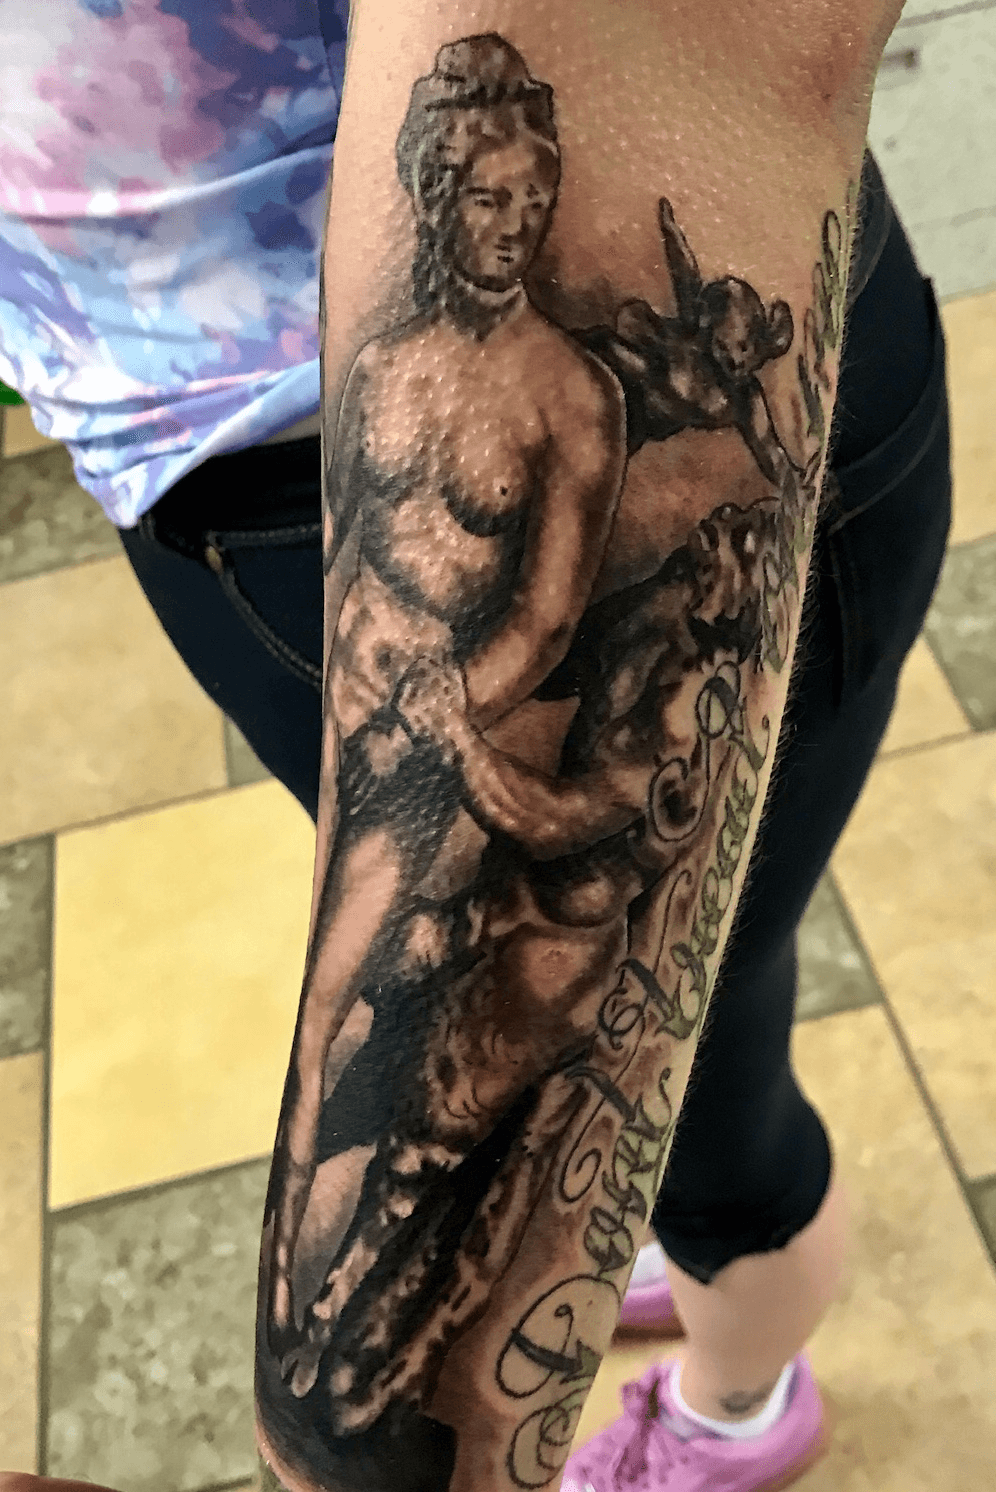 Aphrodite Tattoo done by Rodd Diaz at Lucky Bird Tattoo Studio in Annapolis  MD  rtattoos